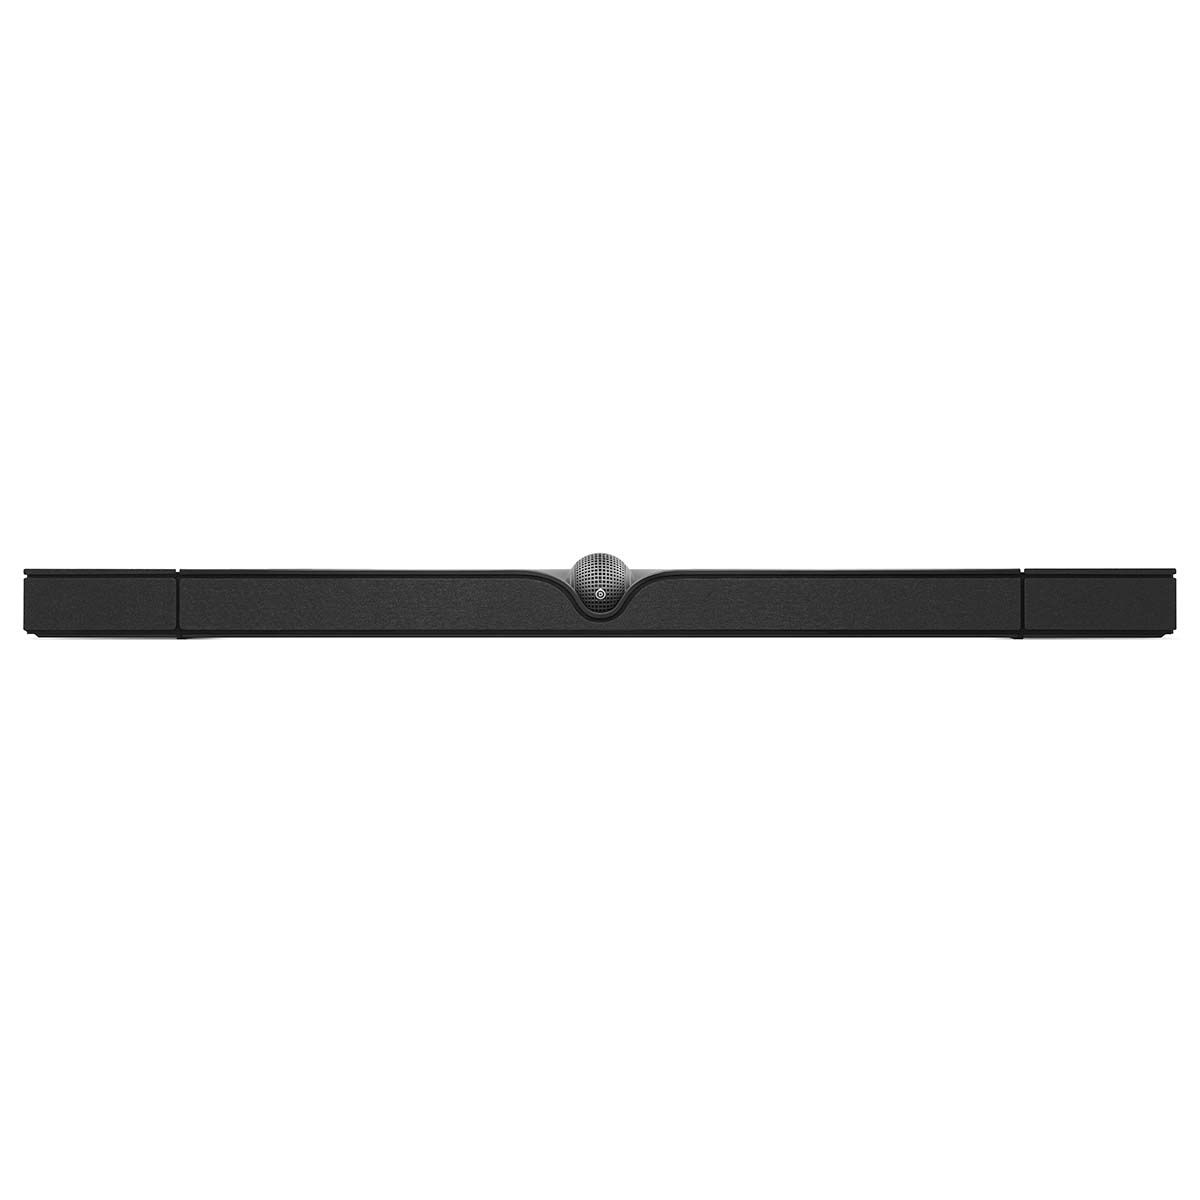 Devialet Dione Dolby Atmos Soundbar, front view